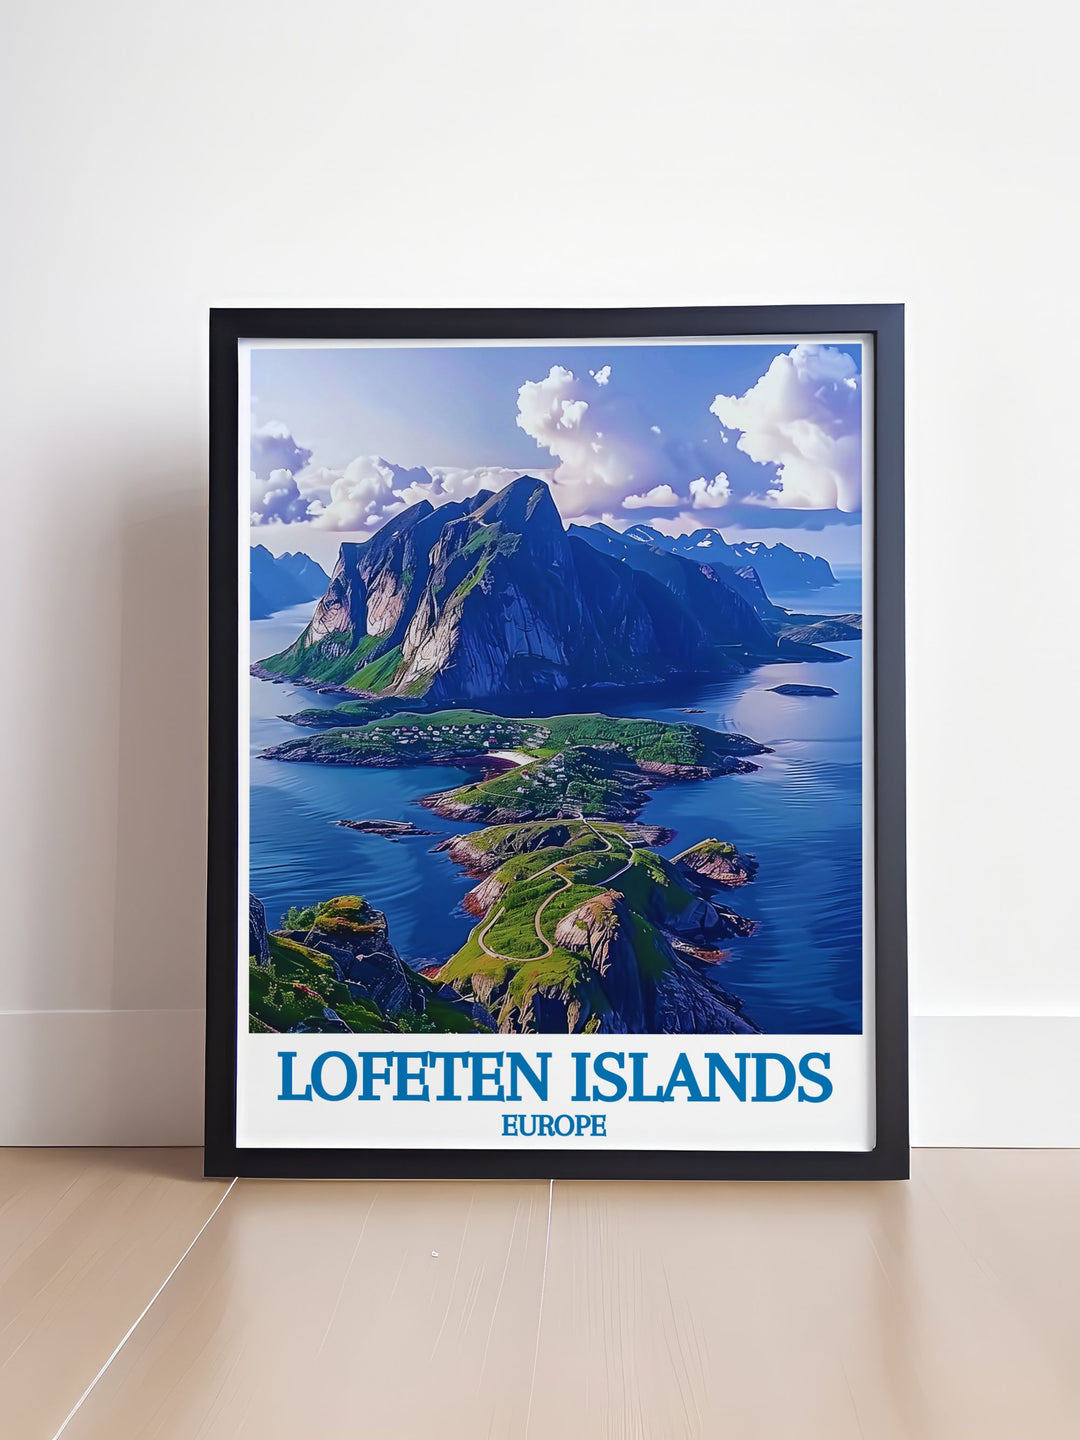 Fine art print capturing the breathtaking views from Reinebringen in the Lofoten Islands, Norway. The poster showcases the rugged mountain peaks, the serene fjord waters, and the picturesque village of Reine, highlighting the natural beauty and dramatic landscapes of this iconic Nordic destination.